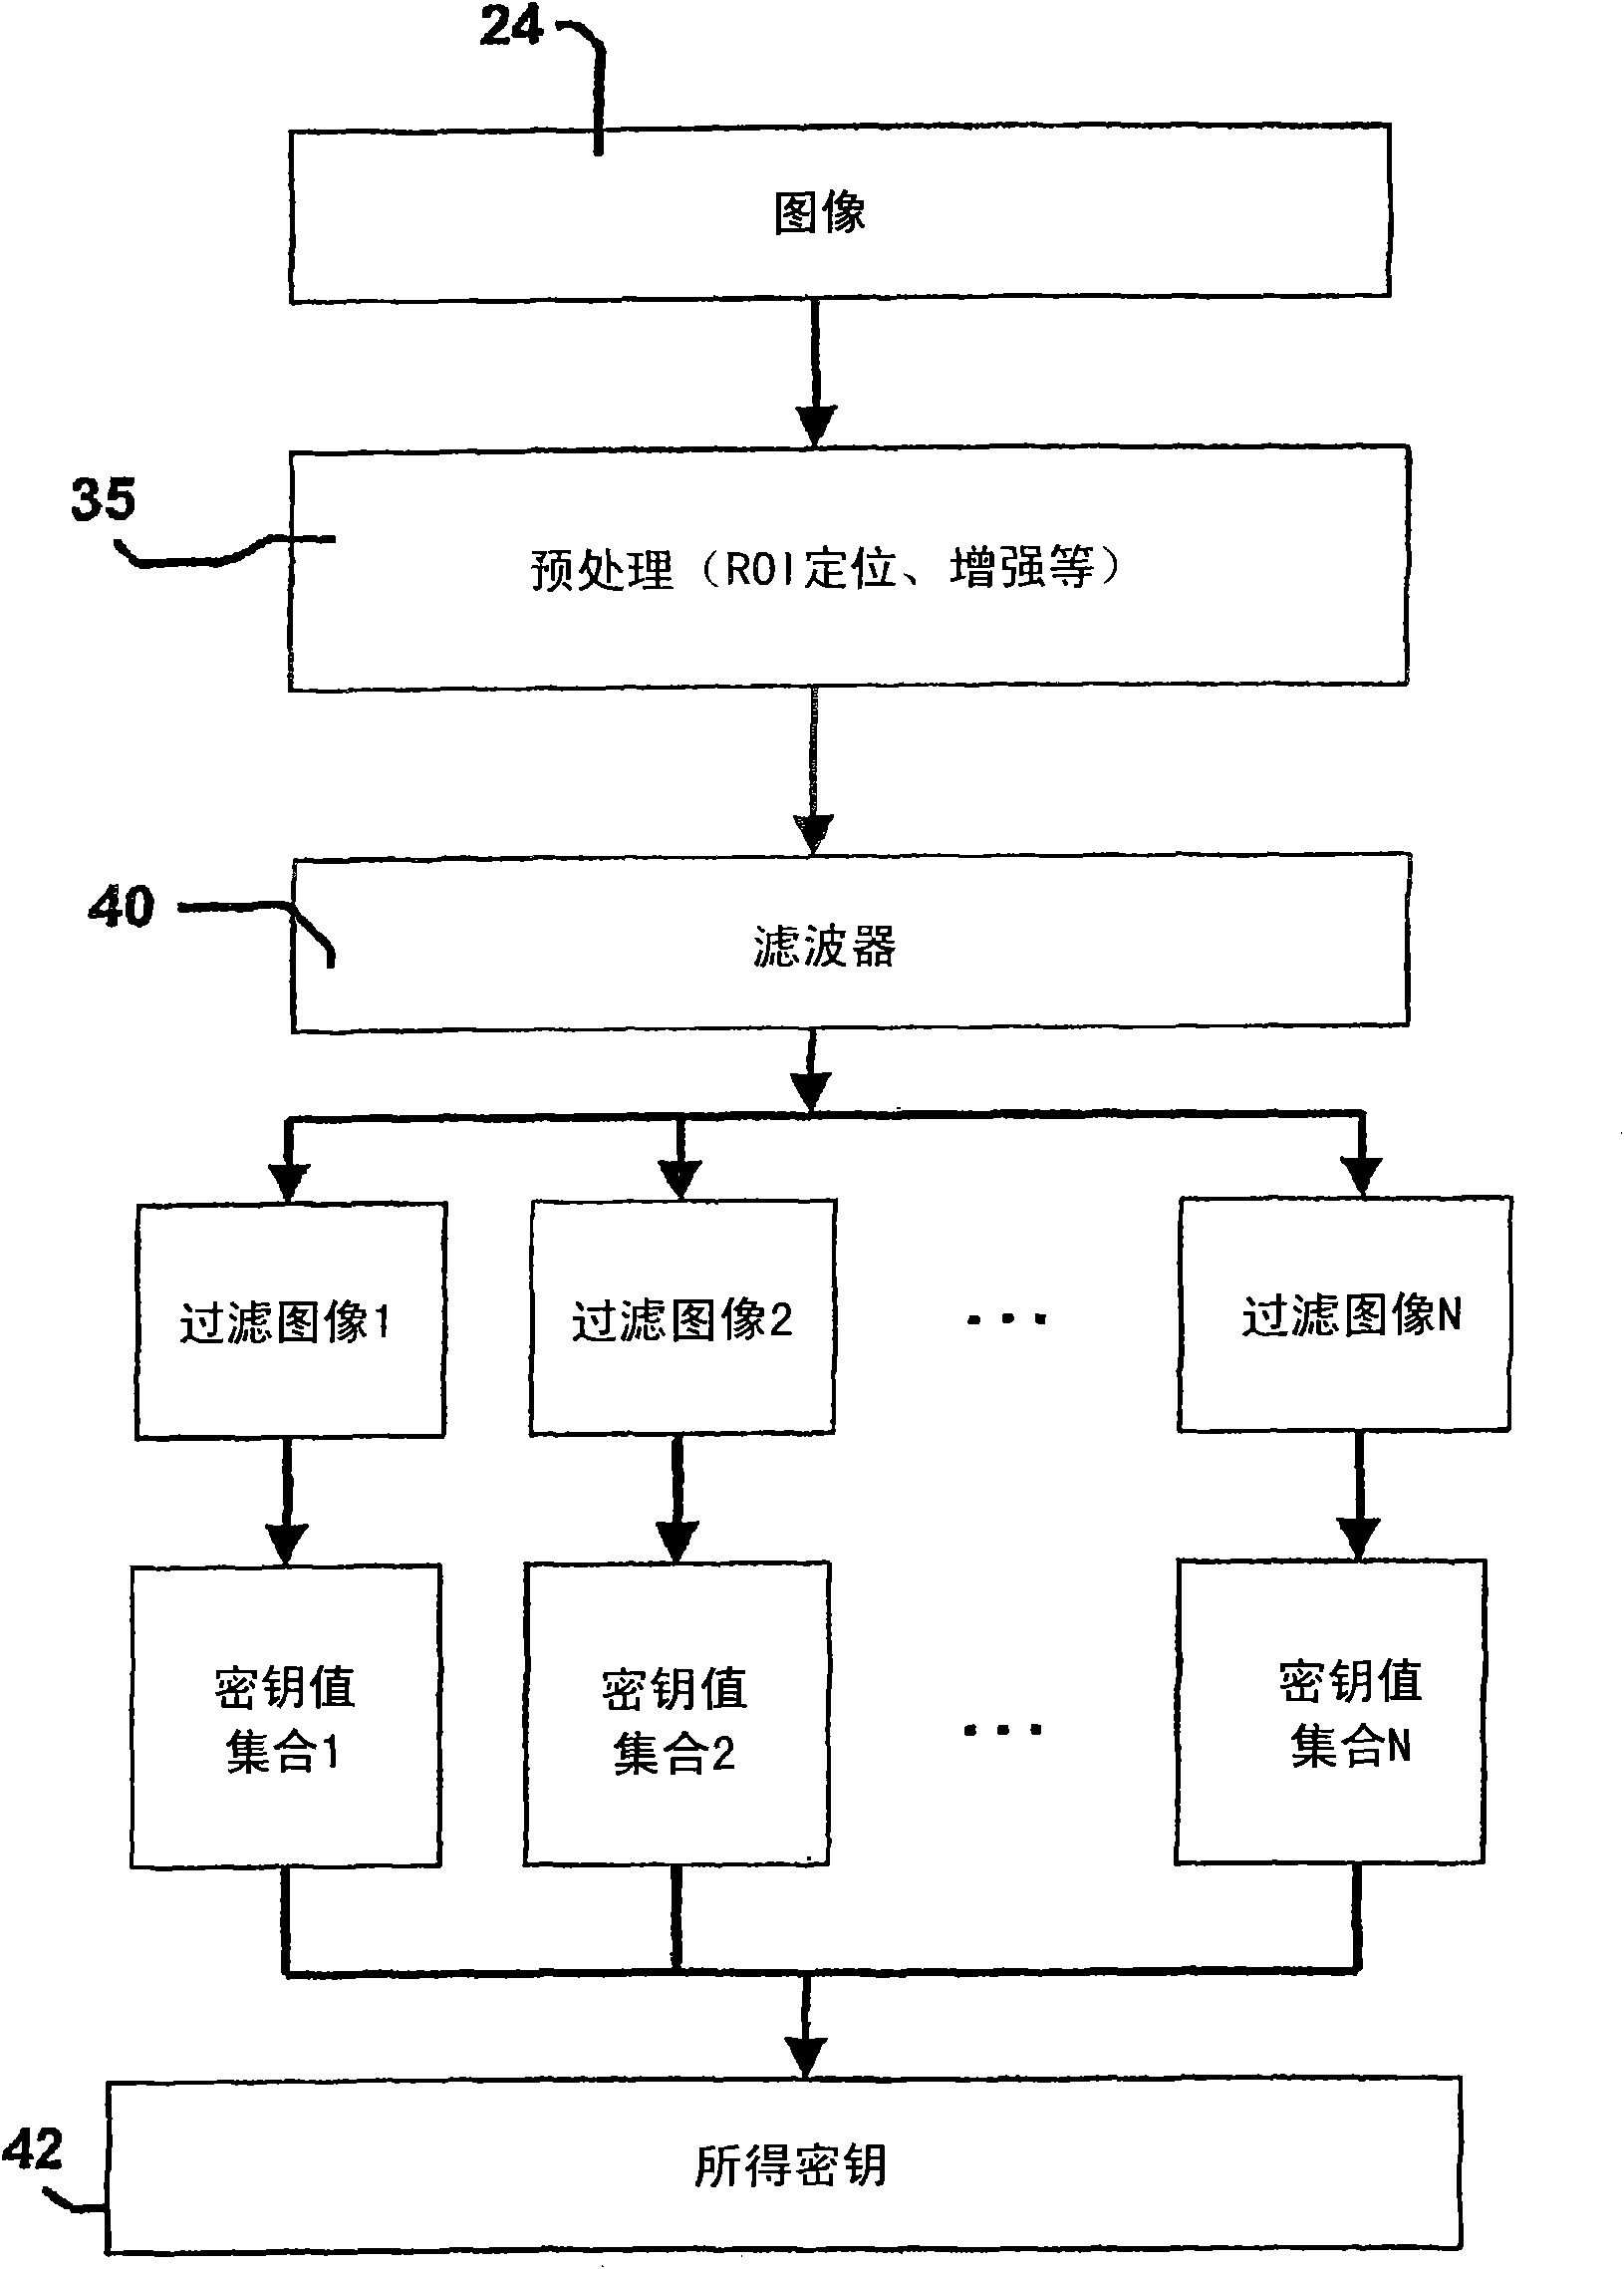 Method and apparatus for extraction and matching of biometric detail